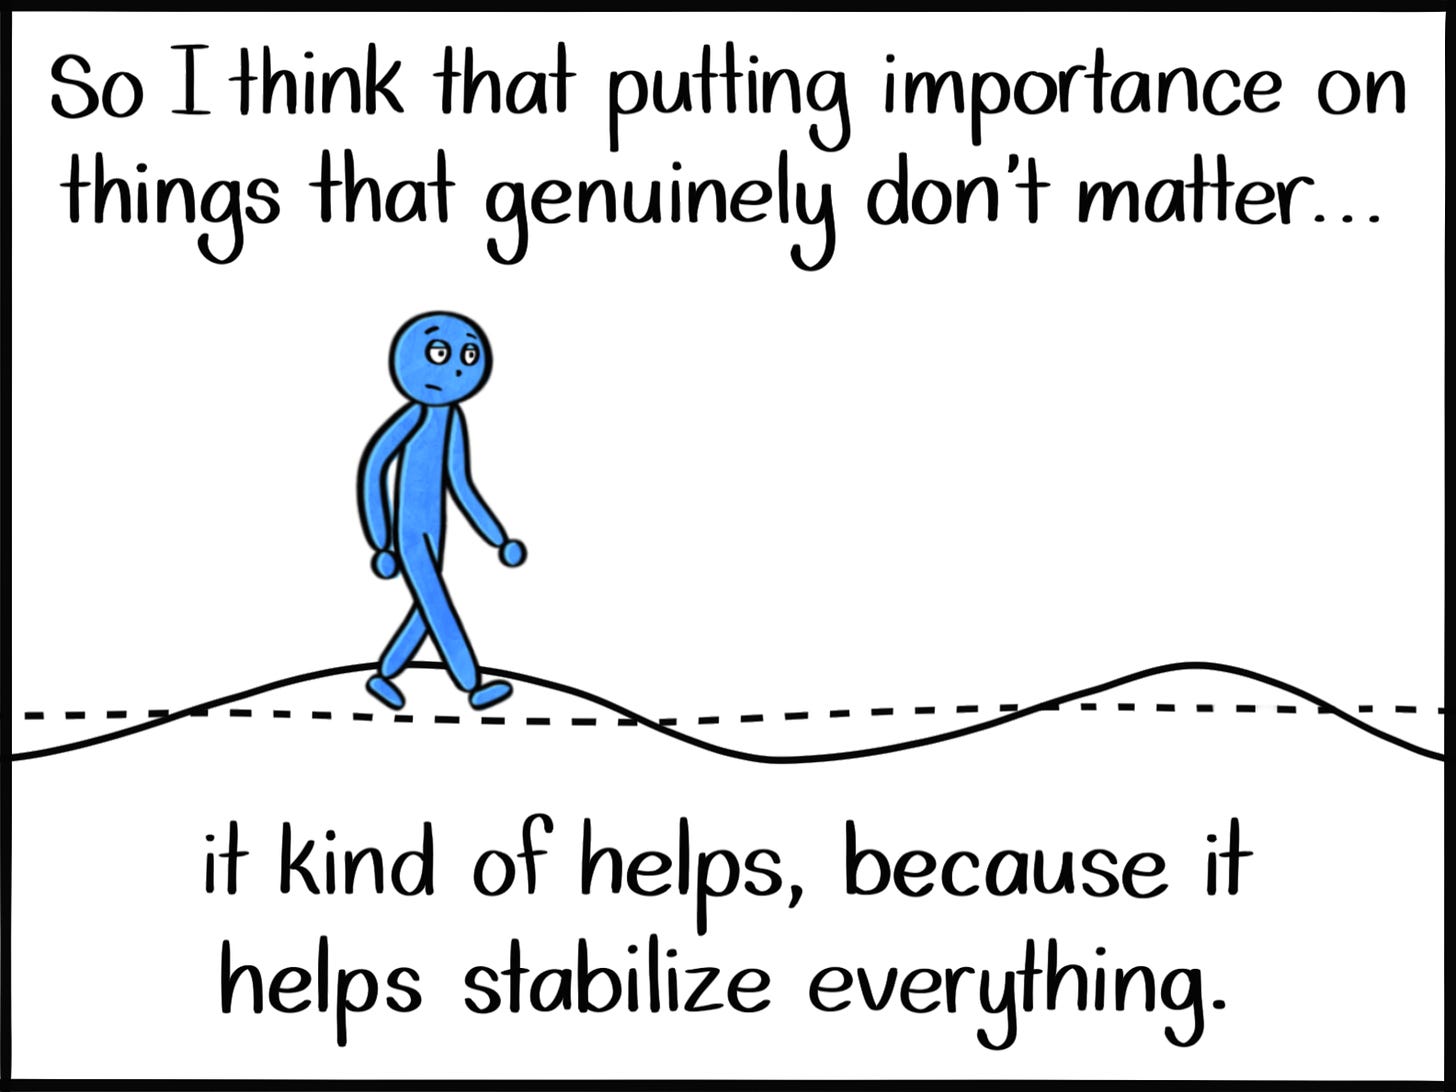 Caption: So I think that putting importance on things that genuinely don't matter... it kind of helps, because it helps stabilize everything. Image: Much like the first frame, the blue person walks along a straight horizontal dotted line with a wavy line behind them, except this time, the waves are much less deep.